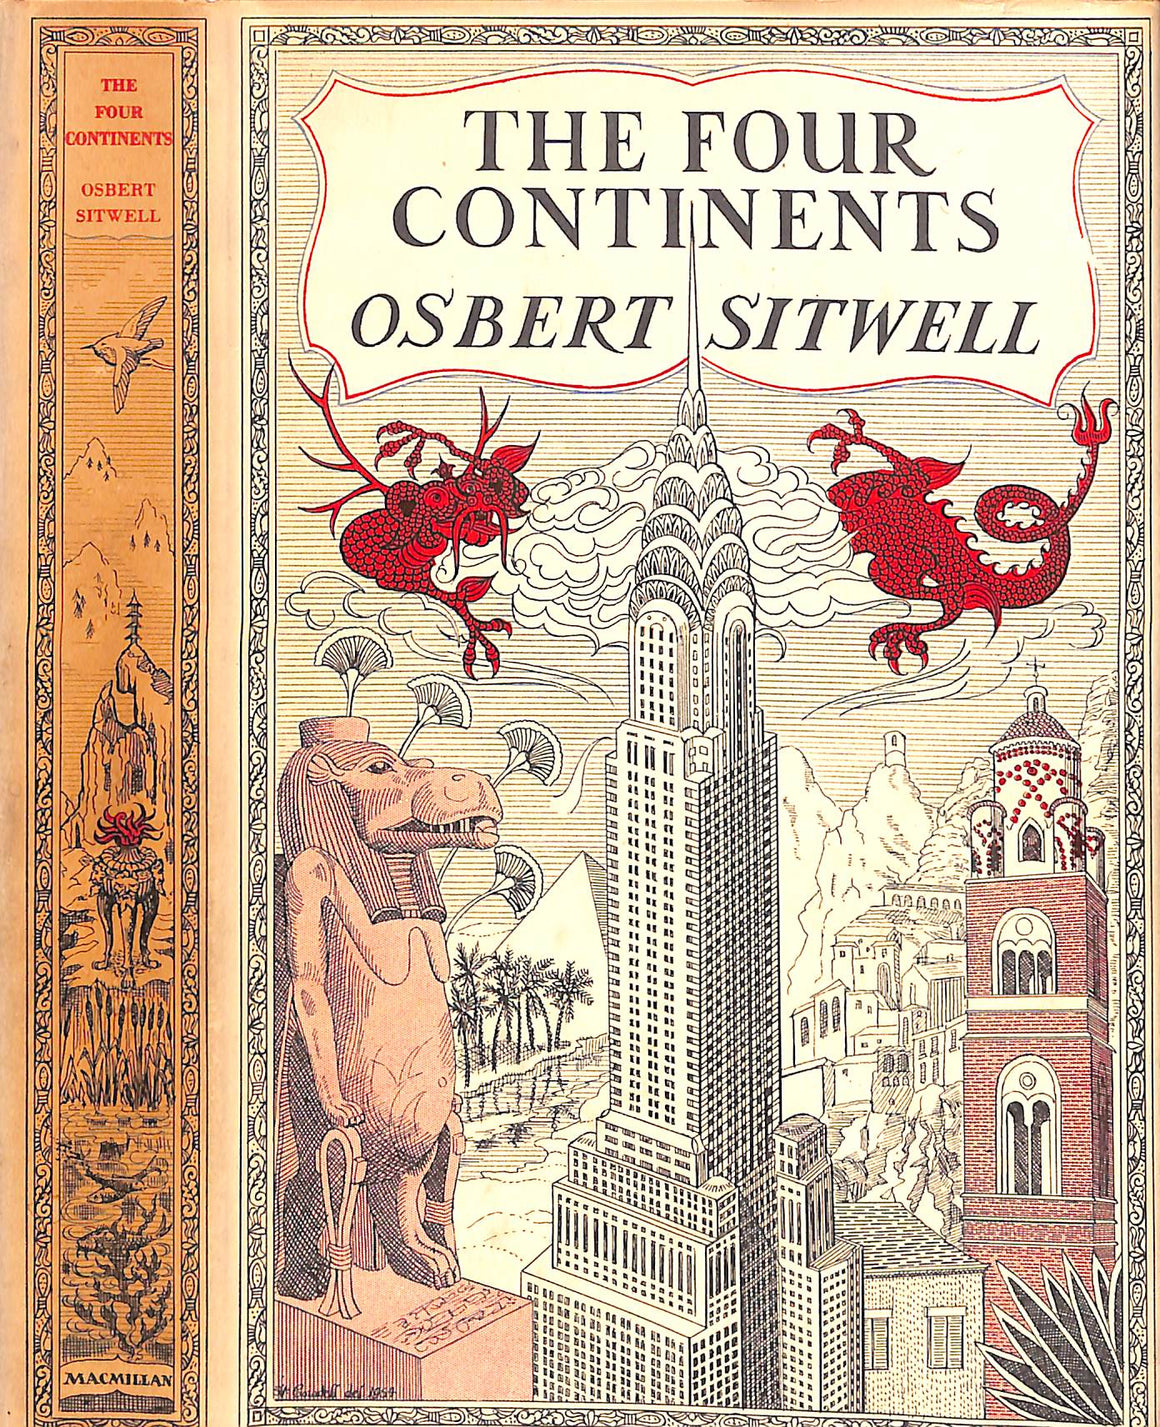 "The Four Continents, Being More Discursions On Travel, Art And Life." 1954 SITWELL, Osbert